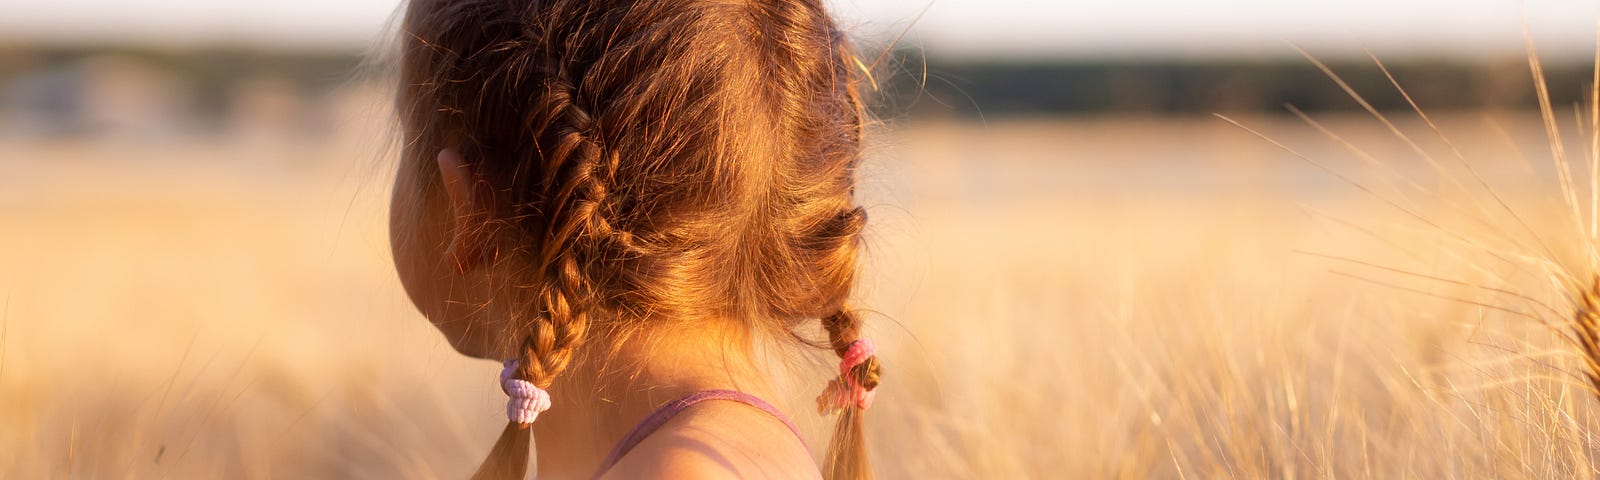 A little girl with braids in her hair looking away in a field of wheat.